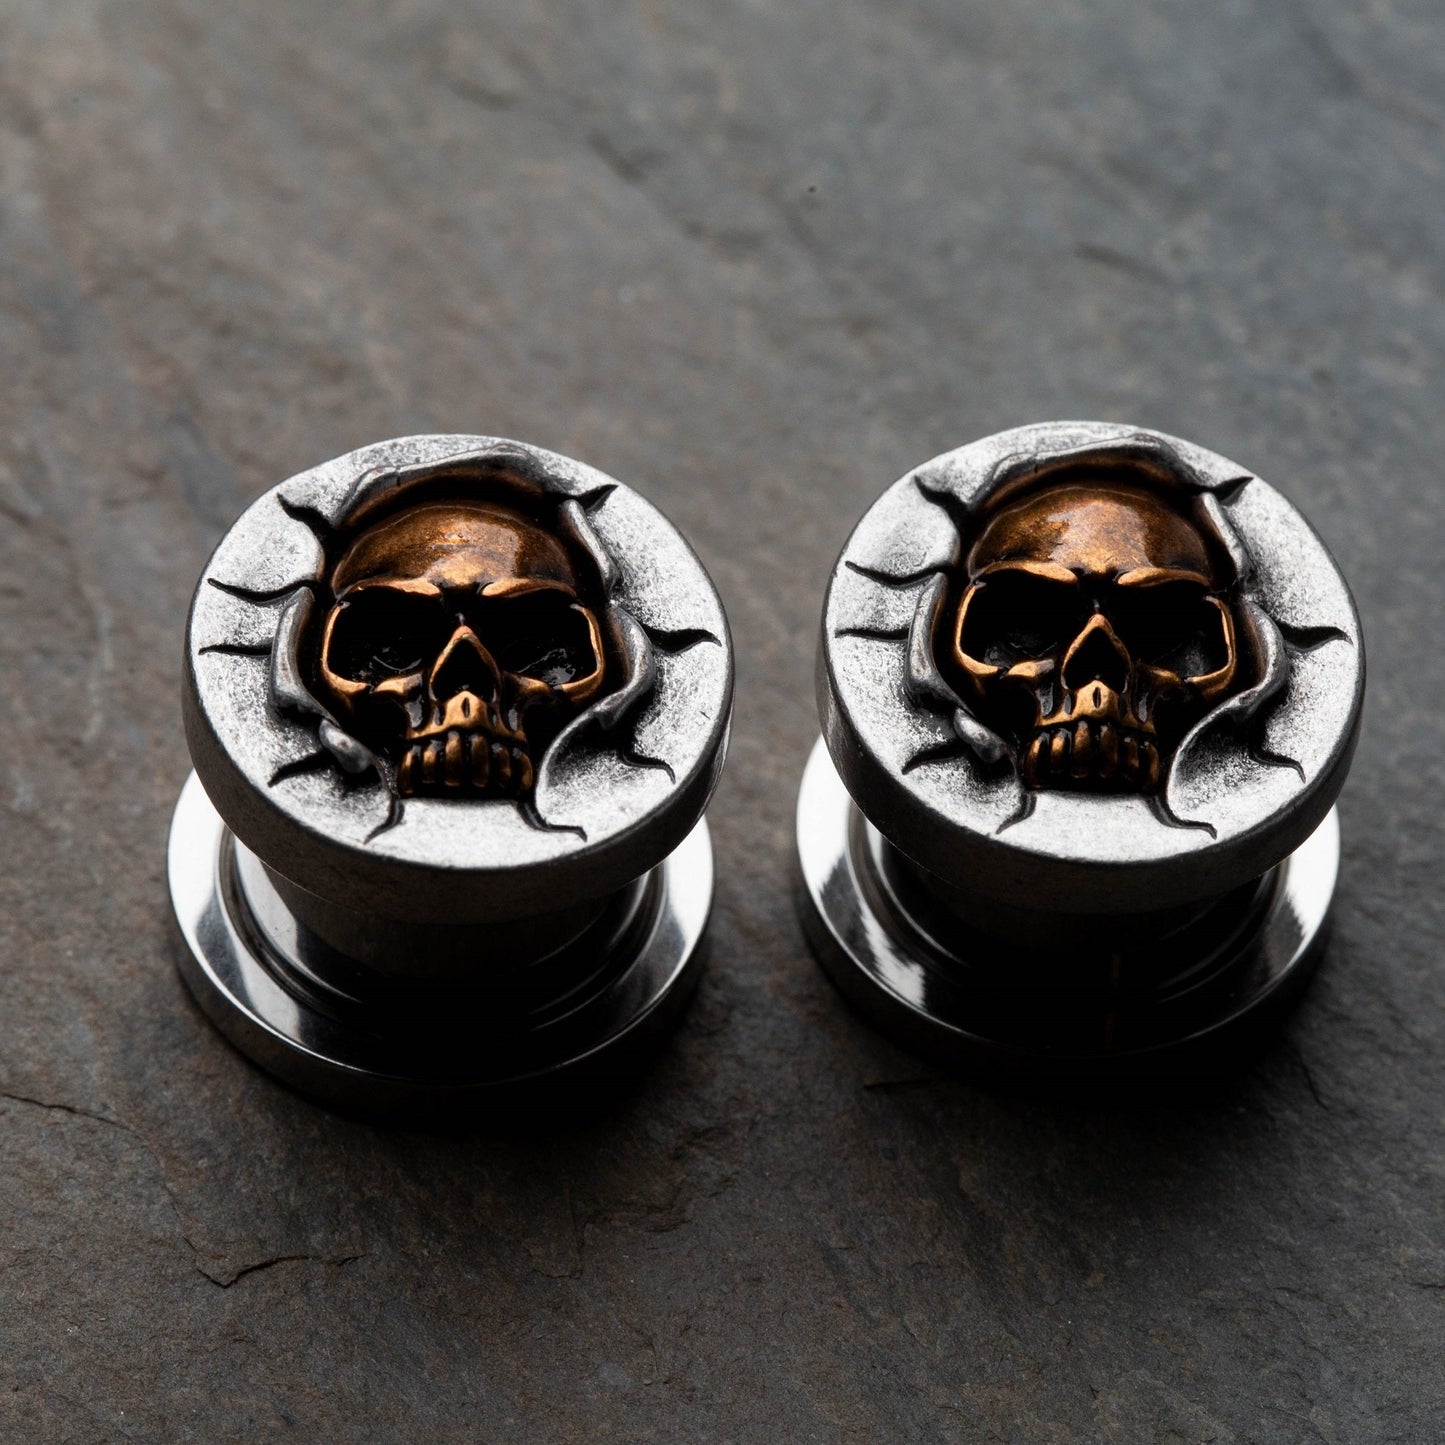 Protruding Bronze Skull Screw Fit Plugs - 316L Stainless Steel - Pair